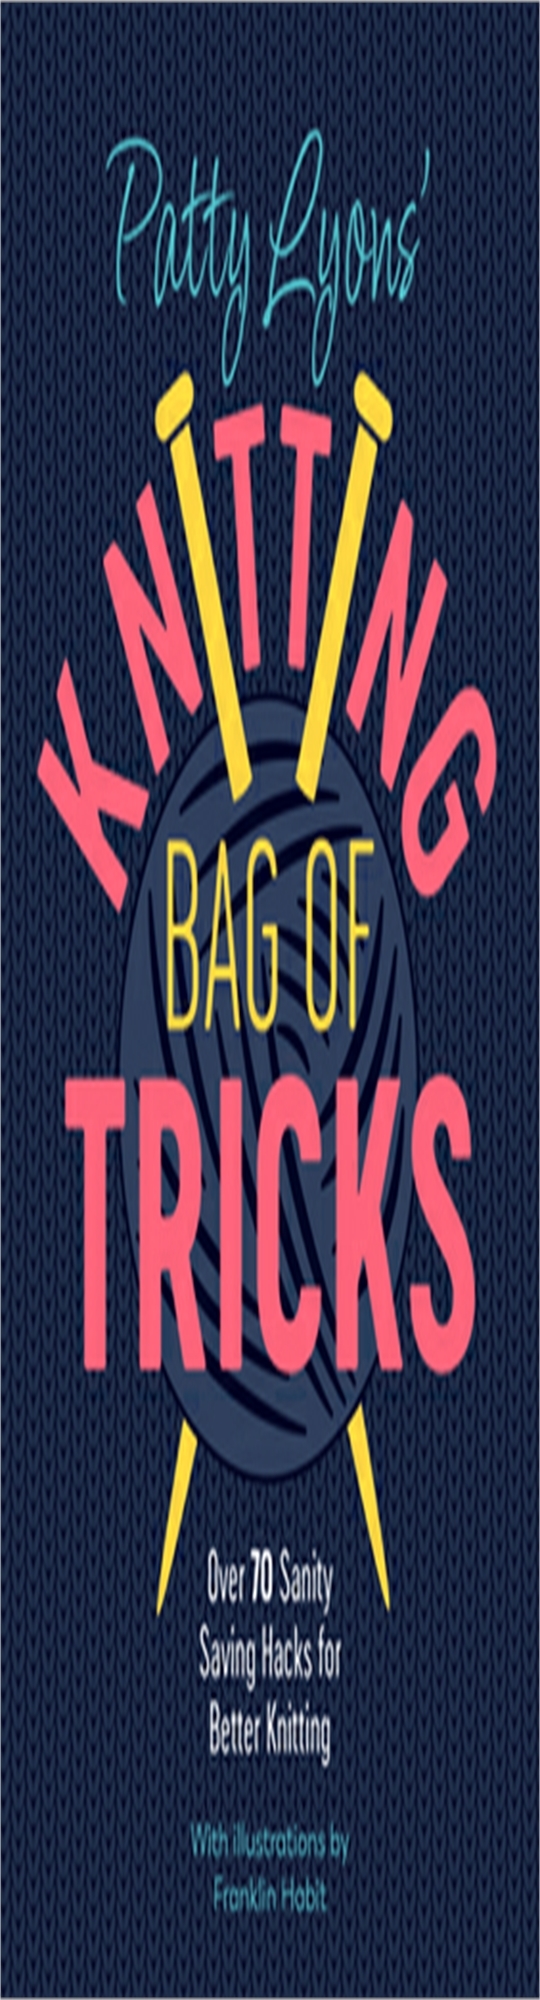 Full Pages Patty Lyons' Knitting Bag of Tricks Over 70 sanity saving